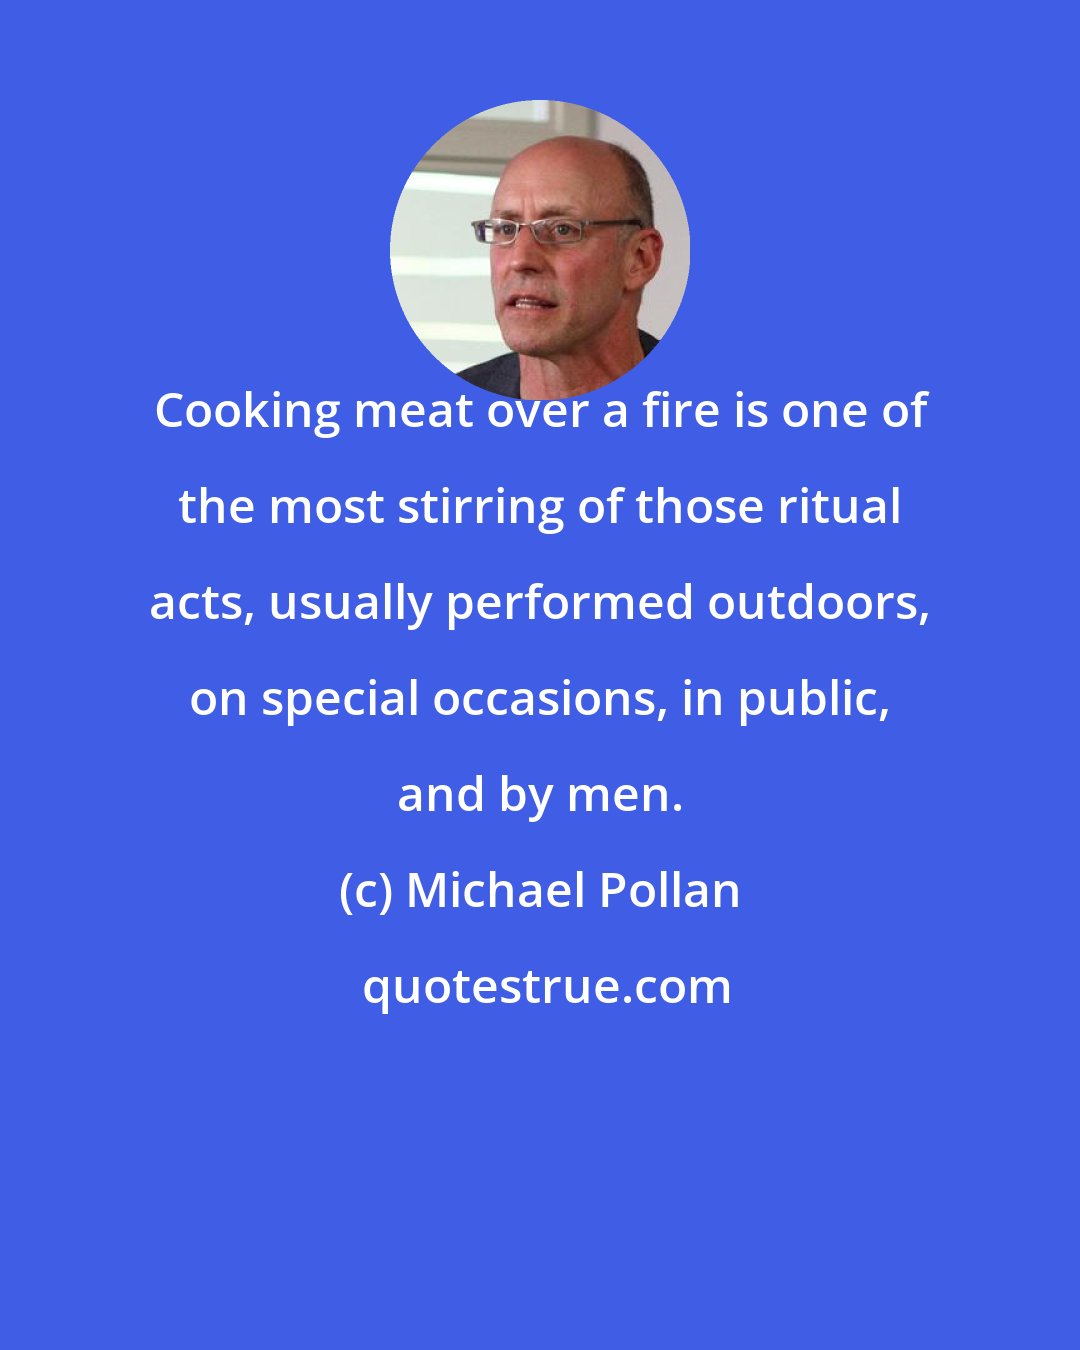 Michael Pollan: Cooking meat over a fire is one of the most stirring of those ritual acts, usually performed outdoors, on special occasions, in public, and by men.